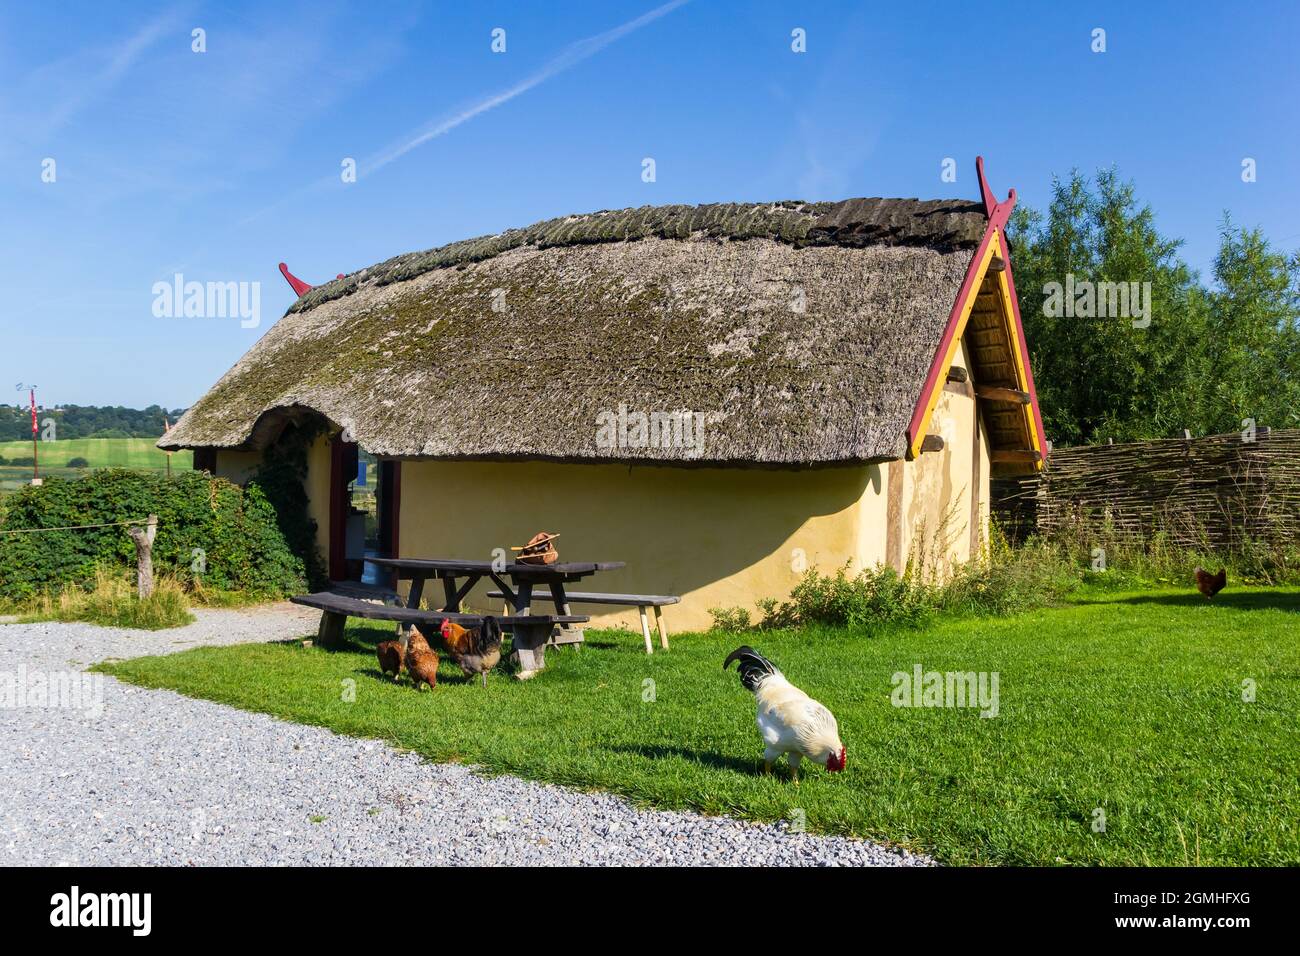 Chickens in front of the small viking house in Fyrkat village near Hobro, Denmark Stock Photo